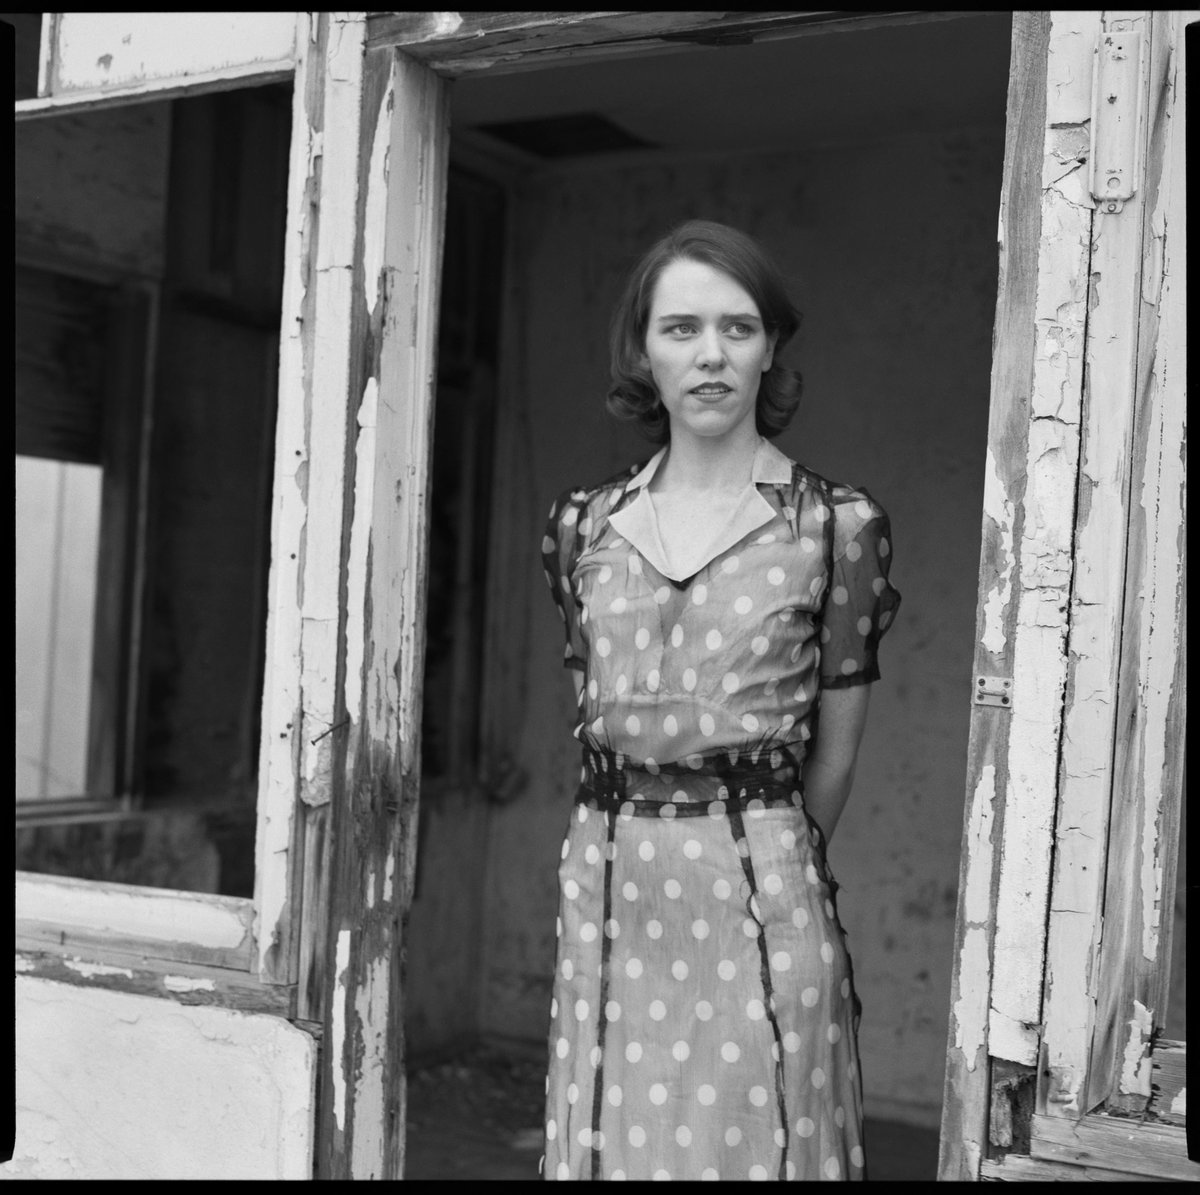 gillianwelch tweet picture